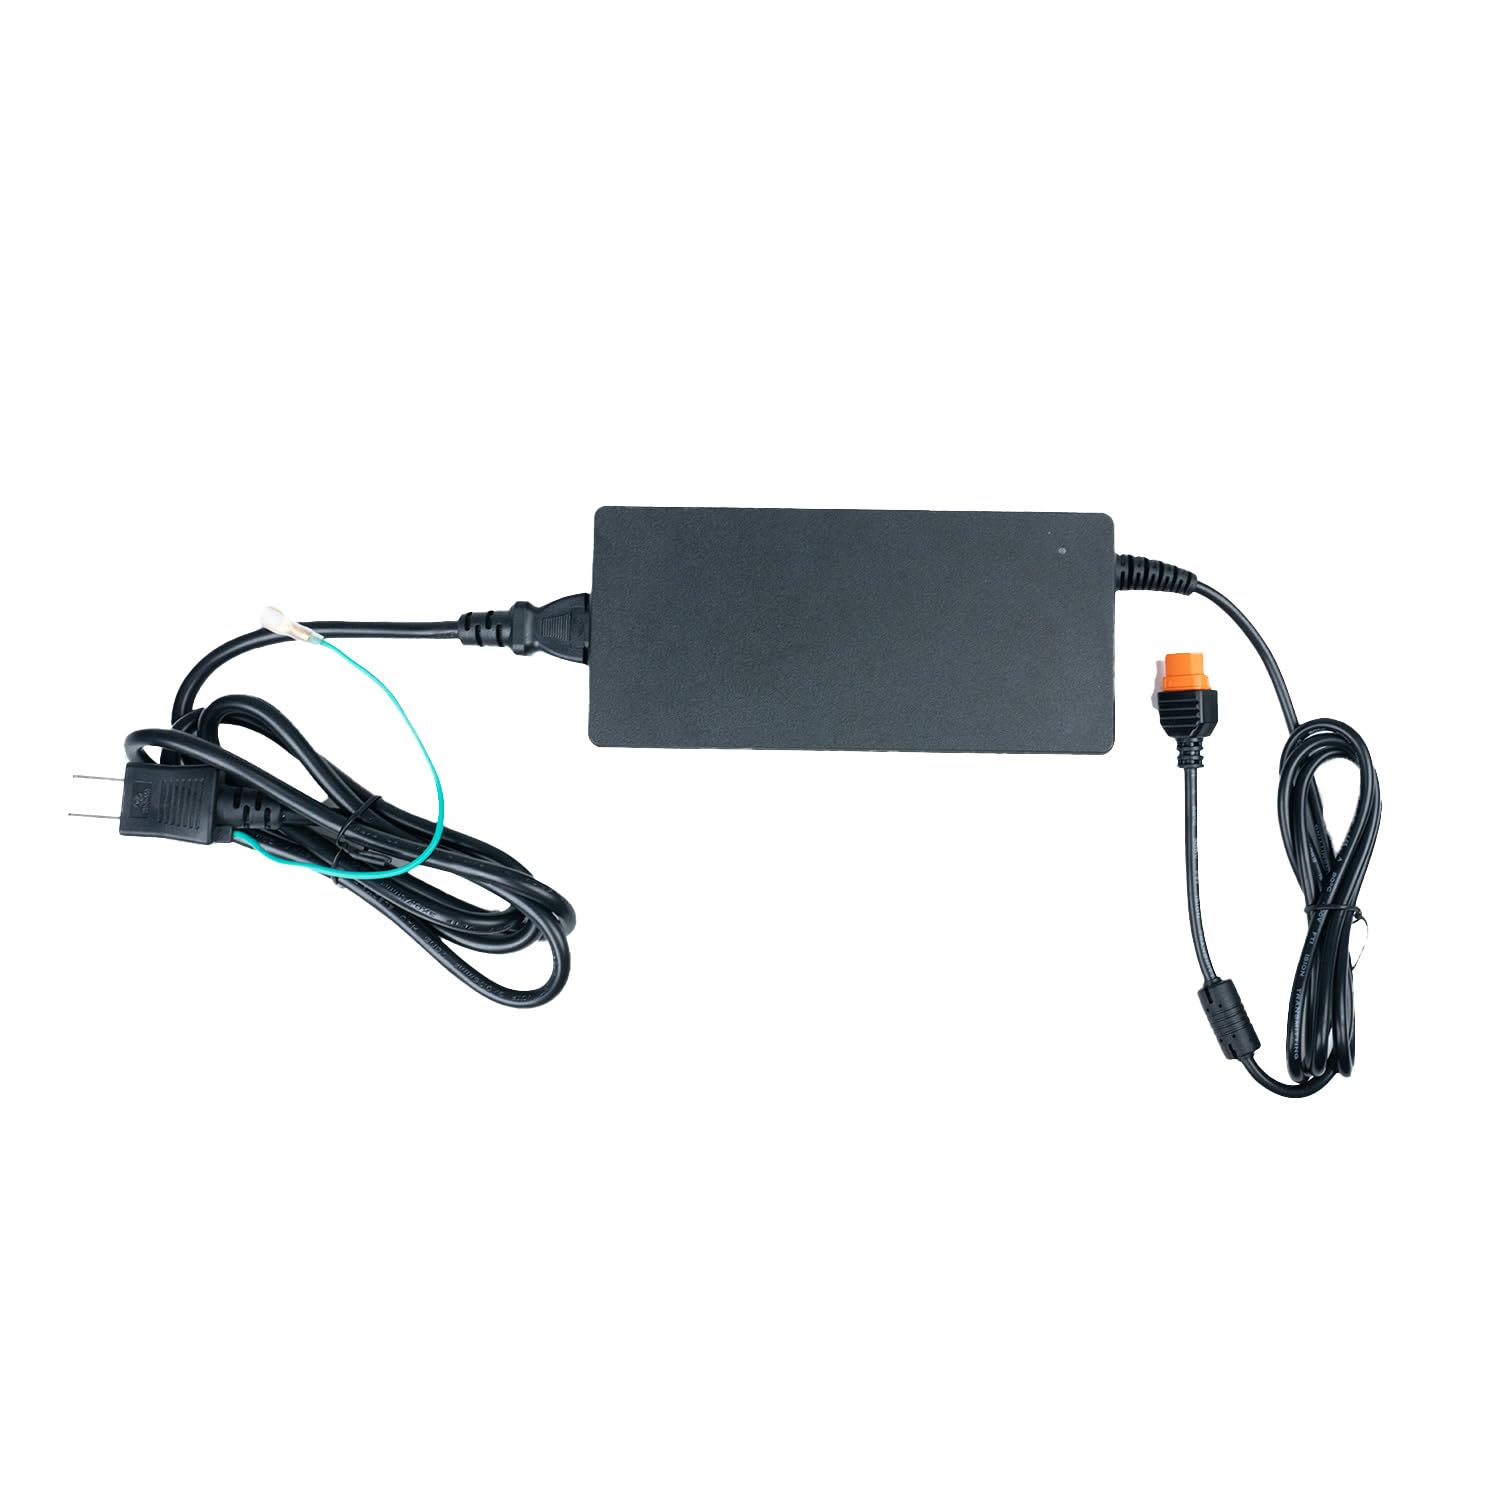 FFpower B2000  200W AC Adapter for Charging